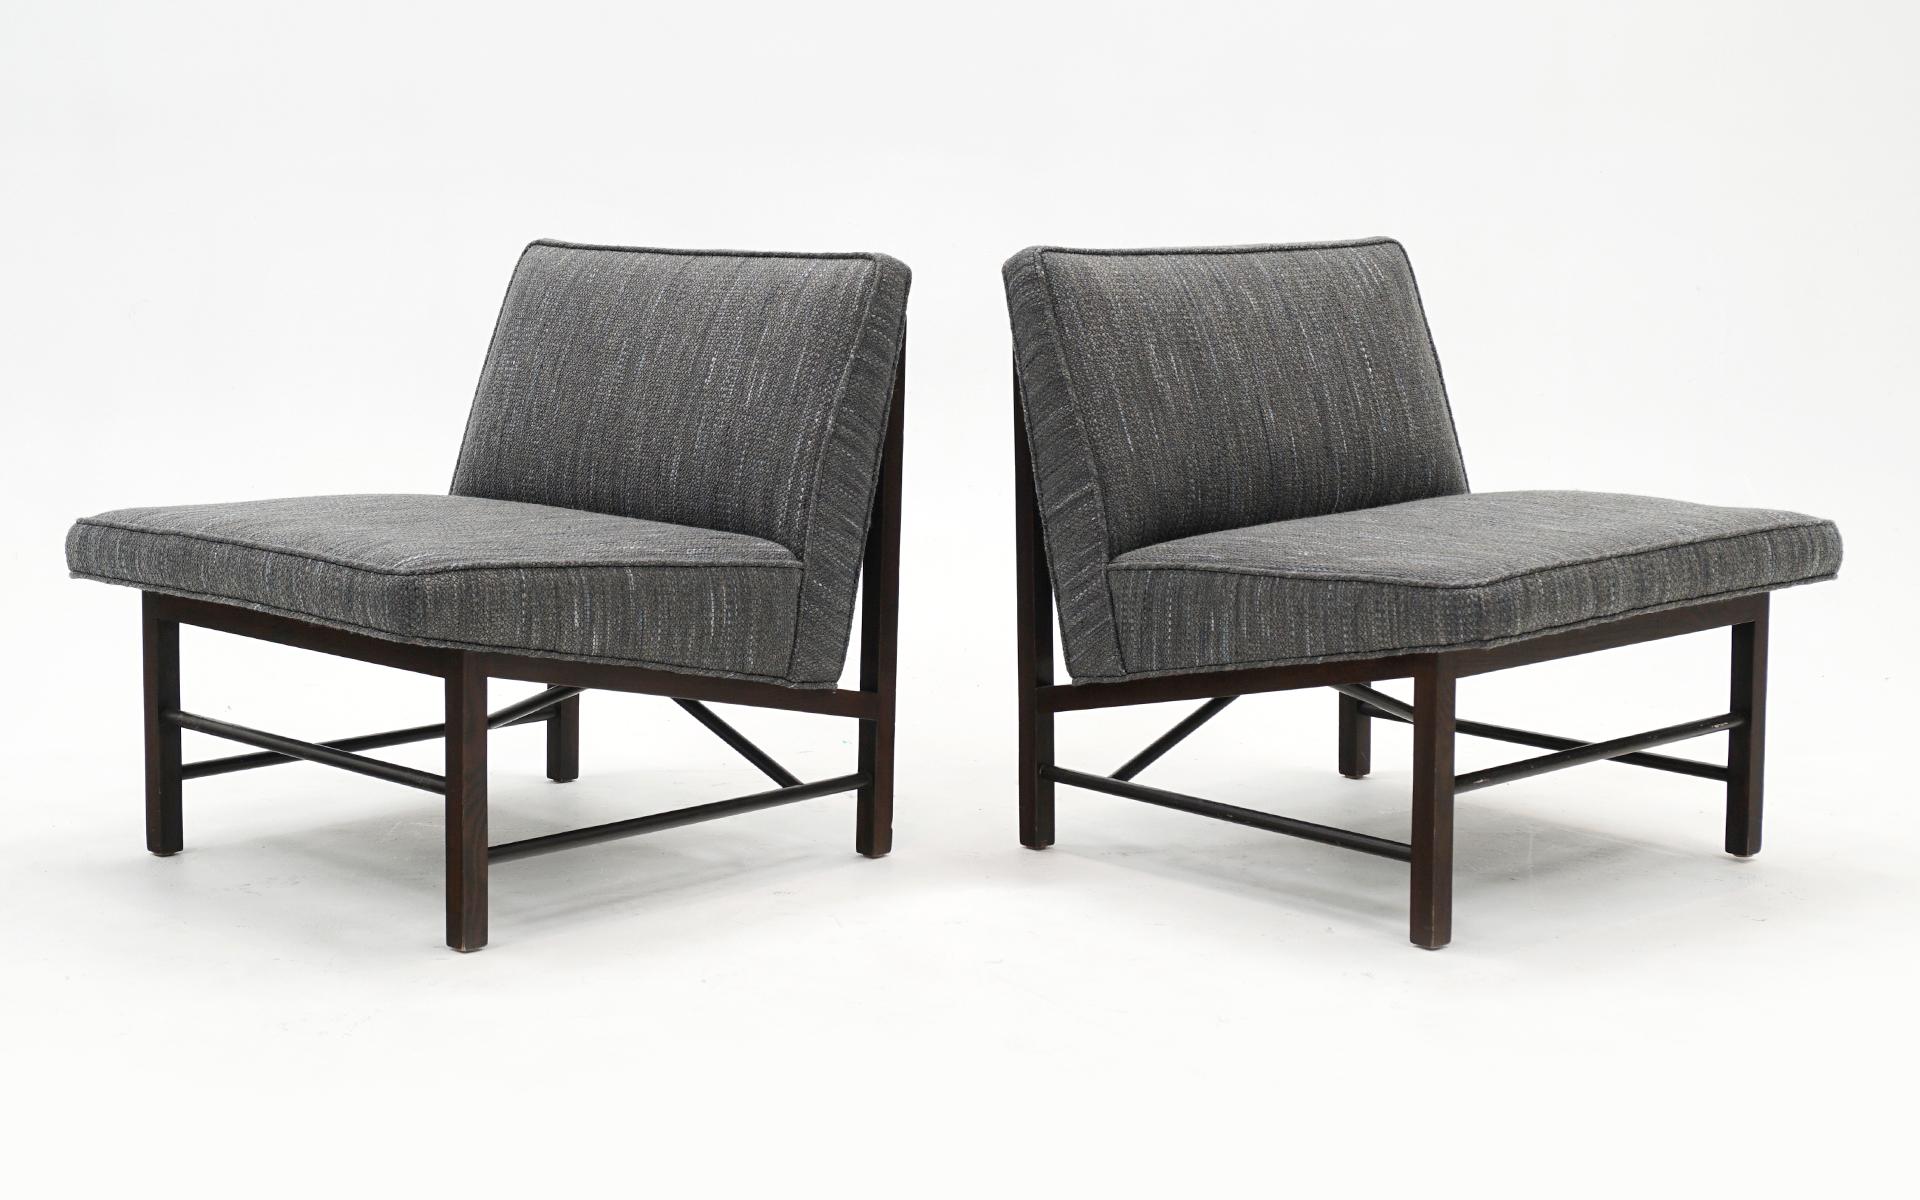 Mid-Century Modern Pair Slipper Chairs by Edward Wormley for Dunbar, New Charcoal Gray Upholstery For Sale